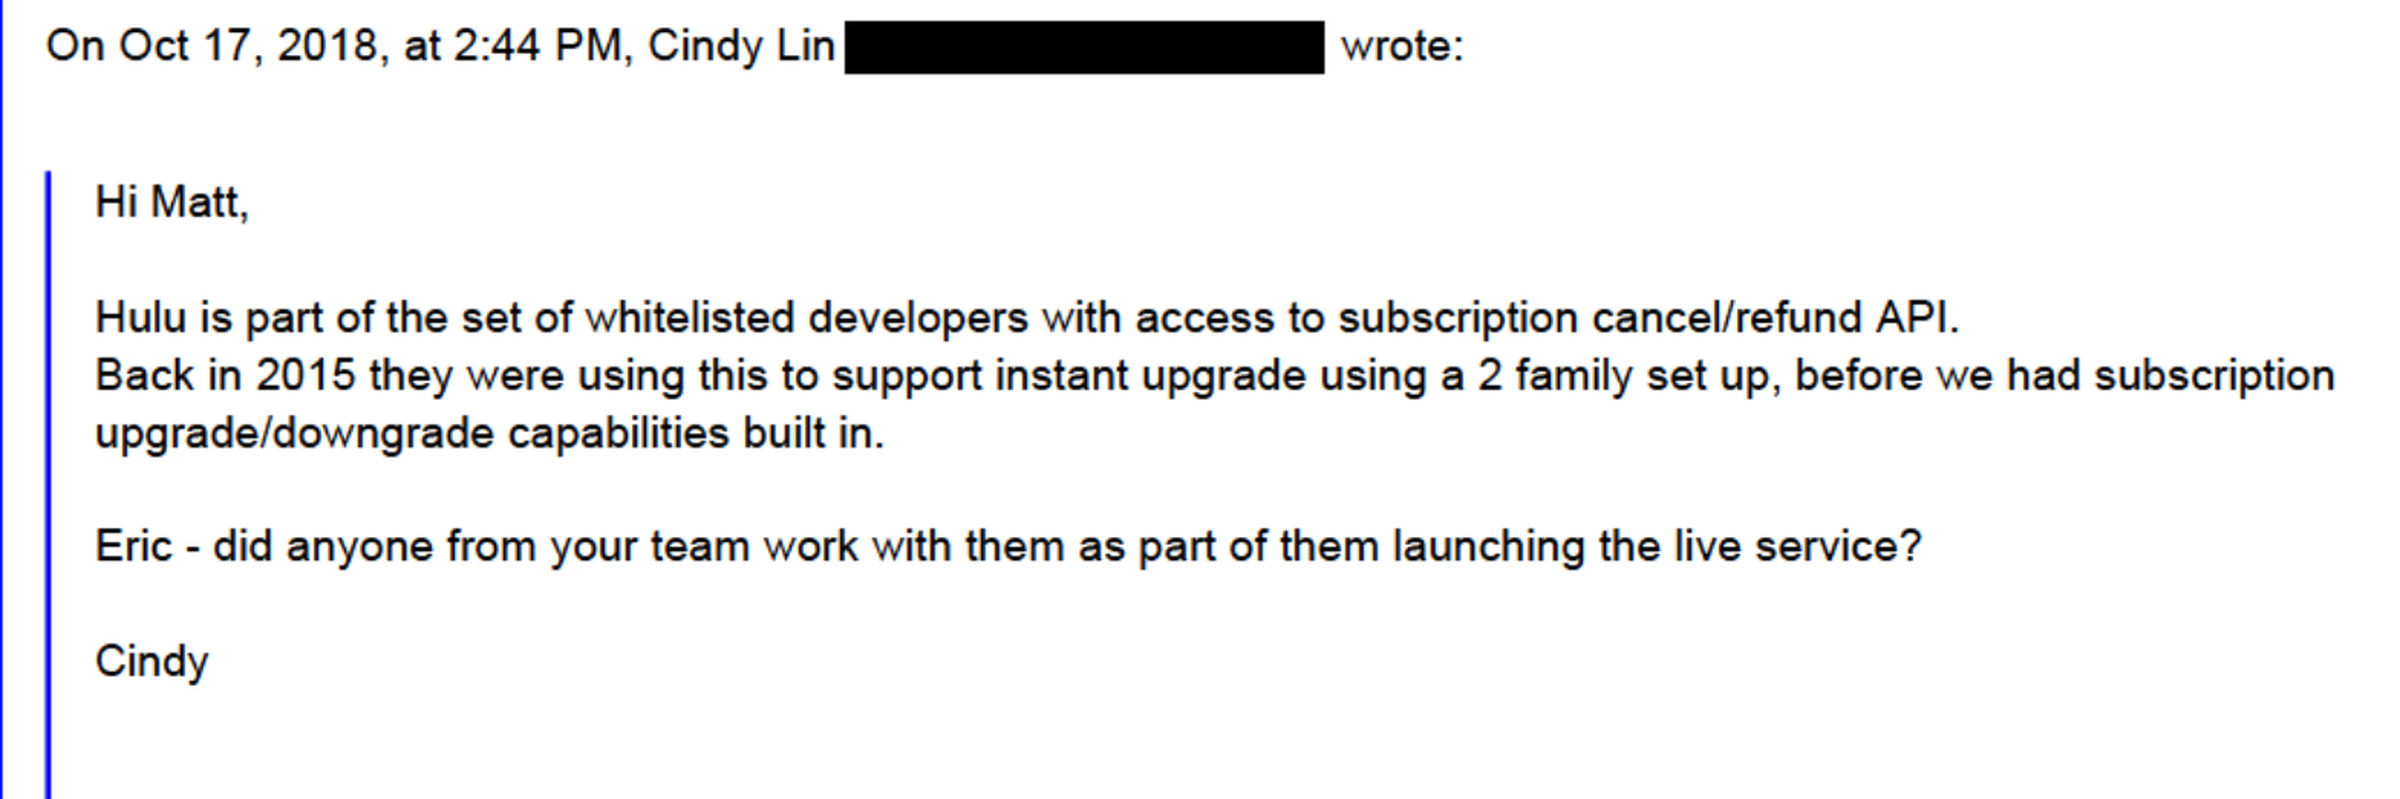 Cindy Lin’s explanation of how Hulu may have been able to automatically cancel subscriptions.